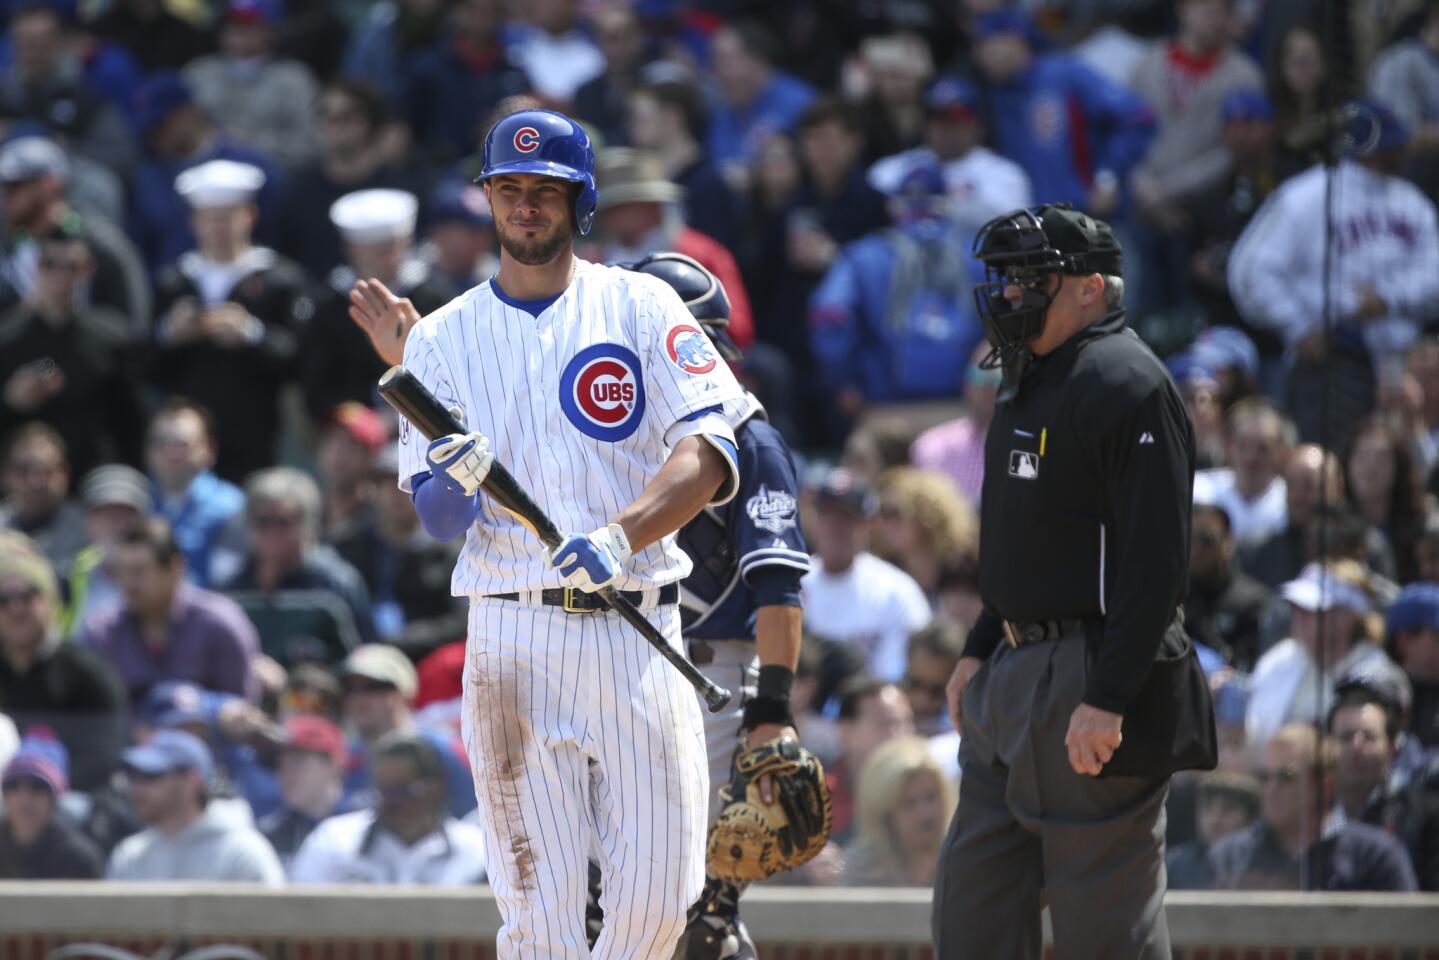 Cubs 7, Padres 6 (11 innings)